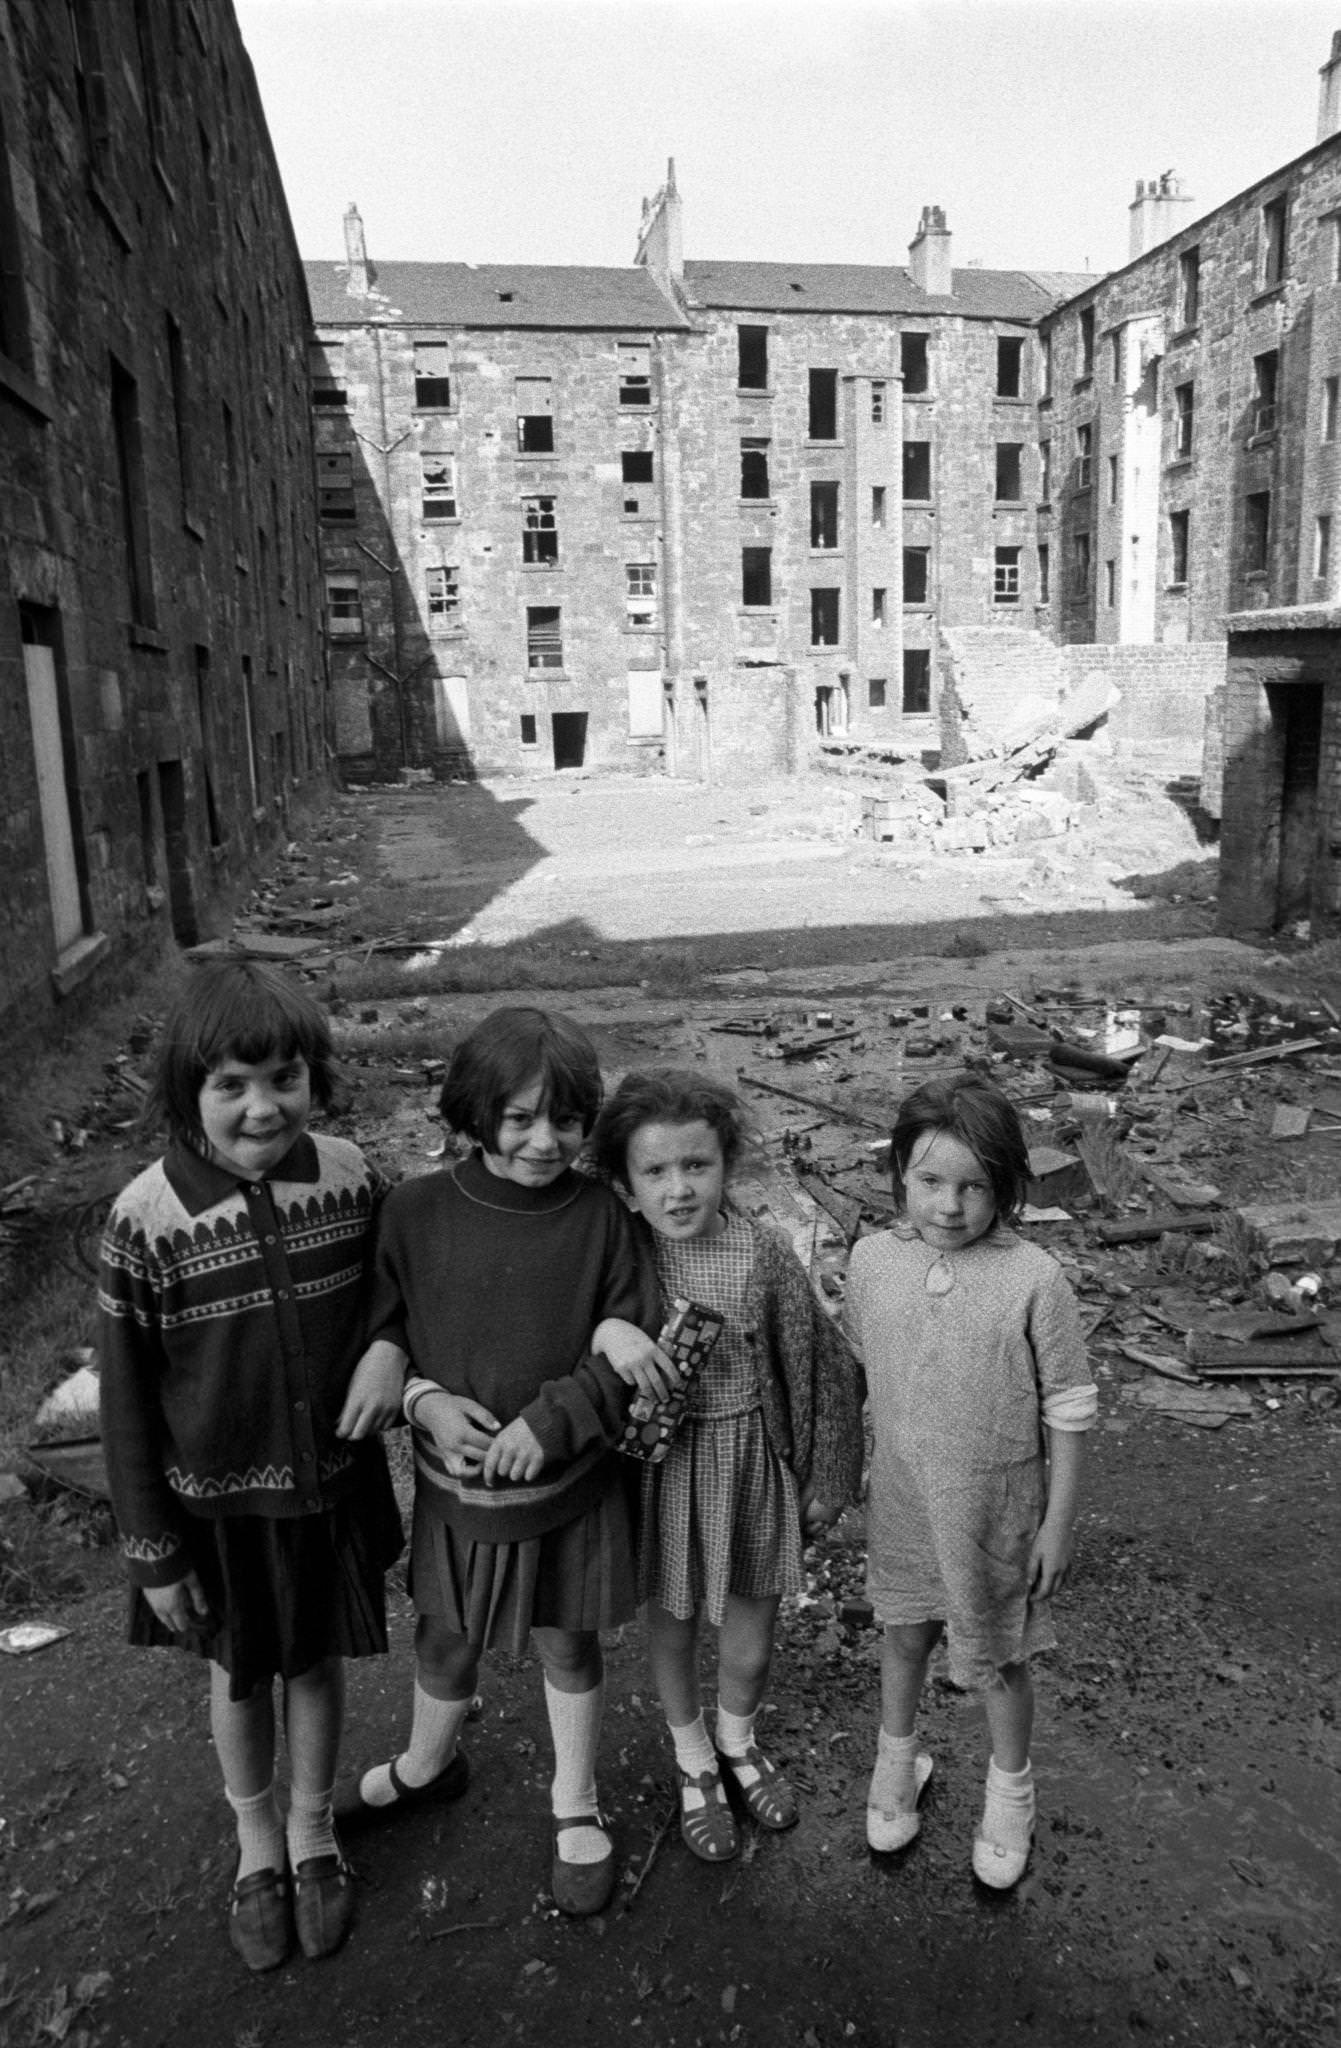 Four little girls posing in front of slum housing in the notorious Gorbals district of Glasgow in 1969.